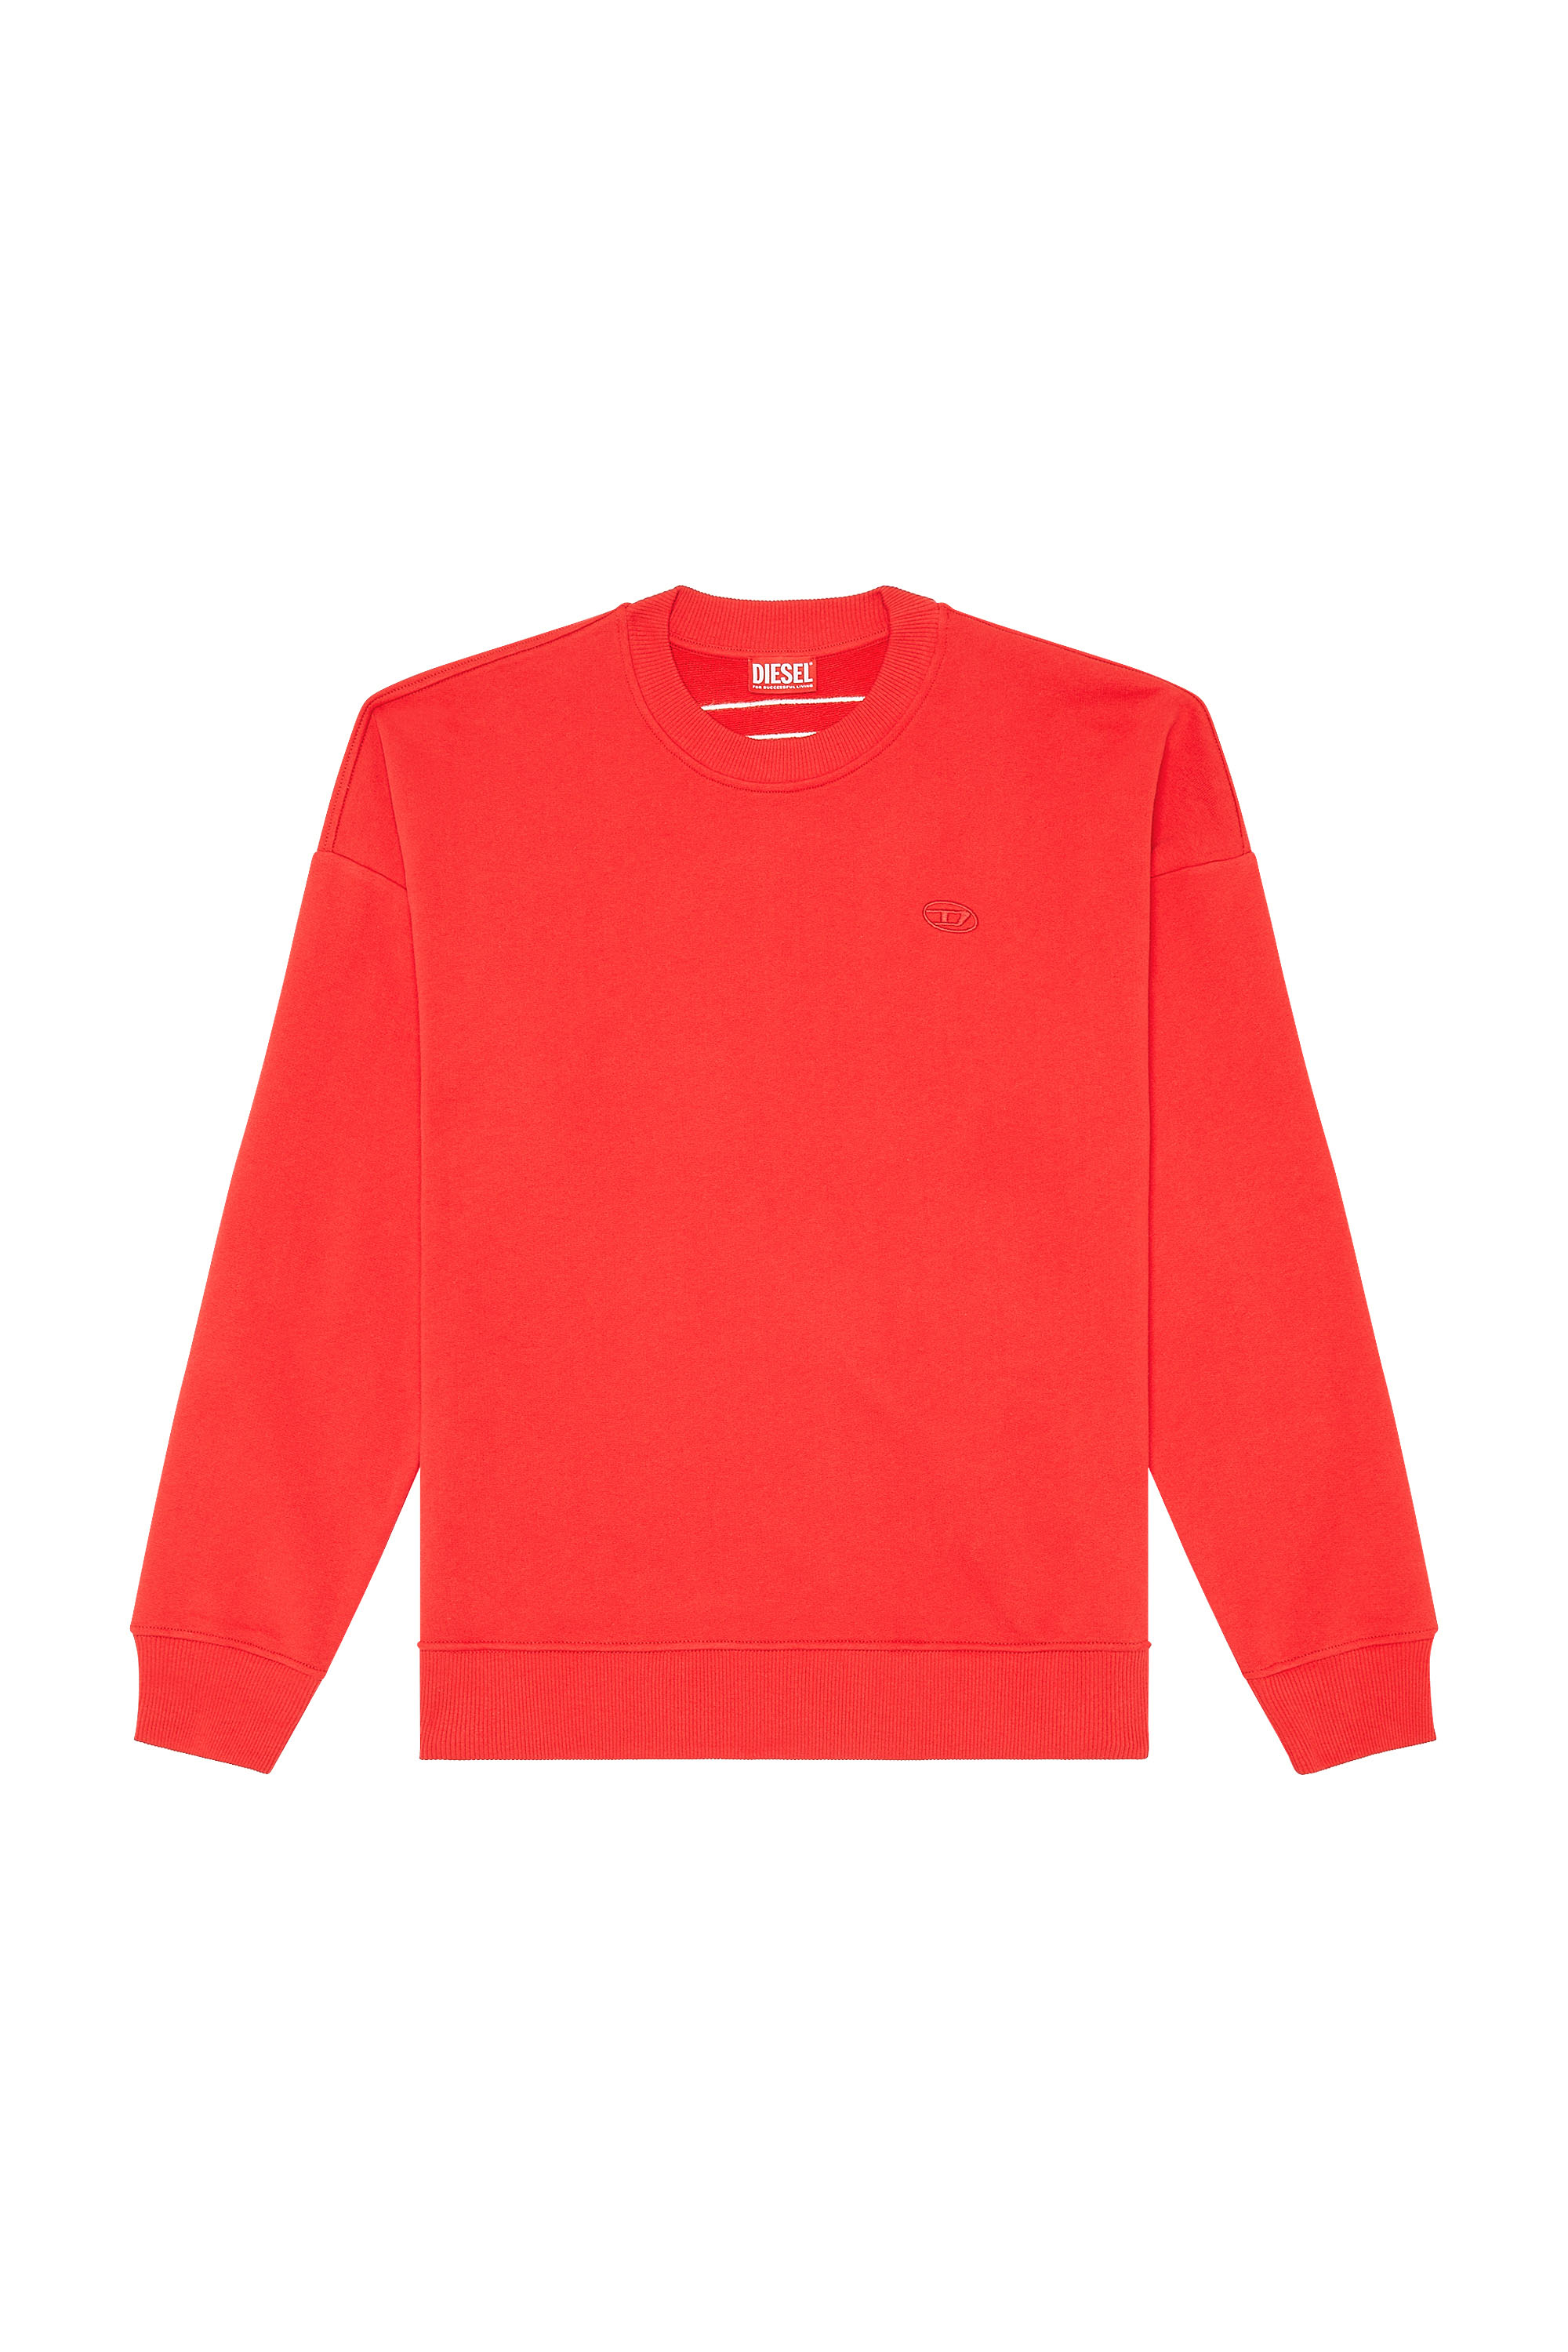 Diesel - S-ROB-MEGOVAL-D, Man Sweatshirt with logo embroidery in Red - Image 4